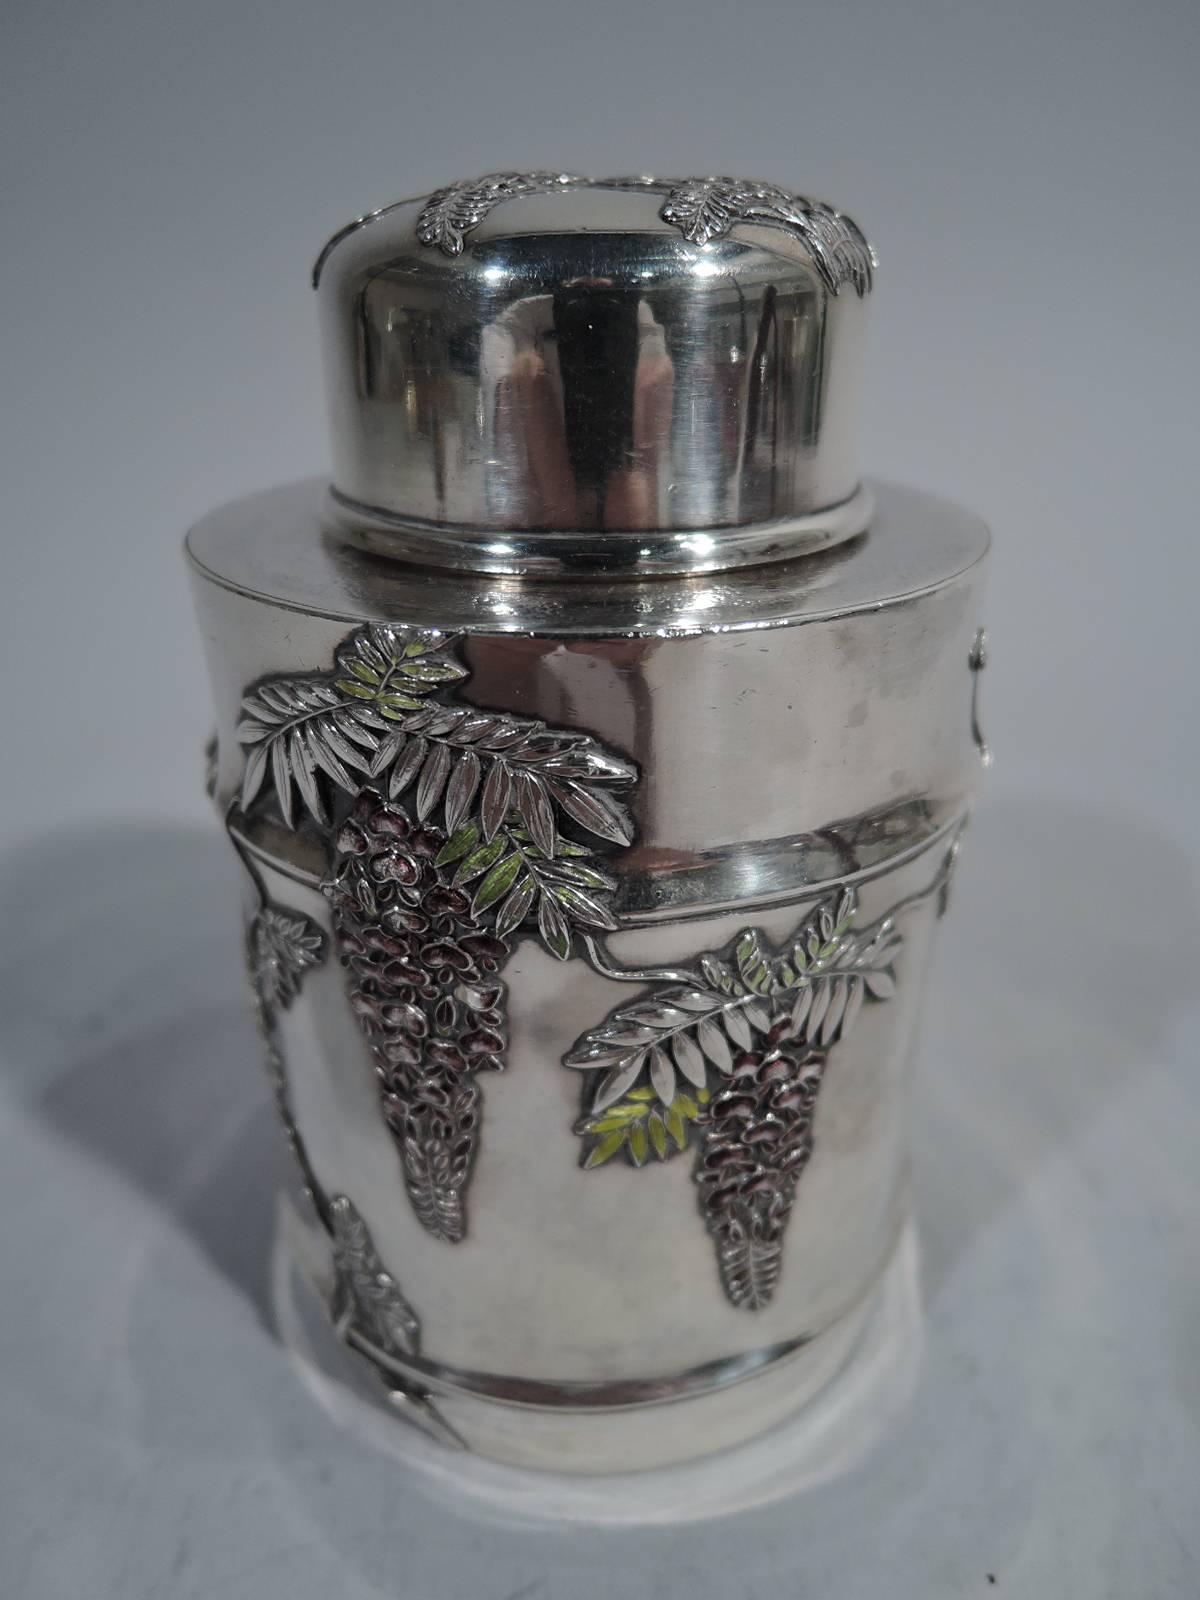 Japanese Meiji silver and enamel tea caddy, circa 1900. Drum form with stippled top, short neck, and snug-fitting cover. Applied wisteria heightened with green, purple, and white enamel. A beautiful piece with practical use: Interior plug keeps